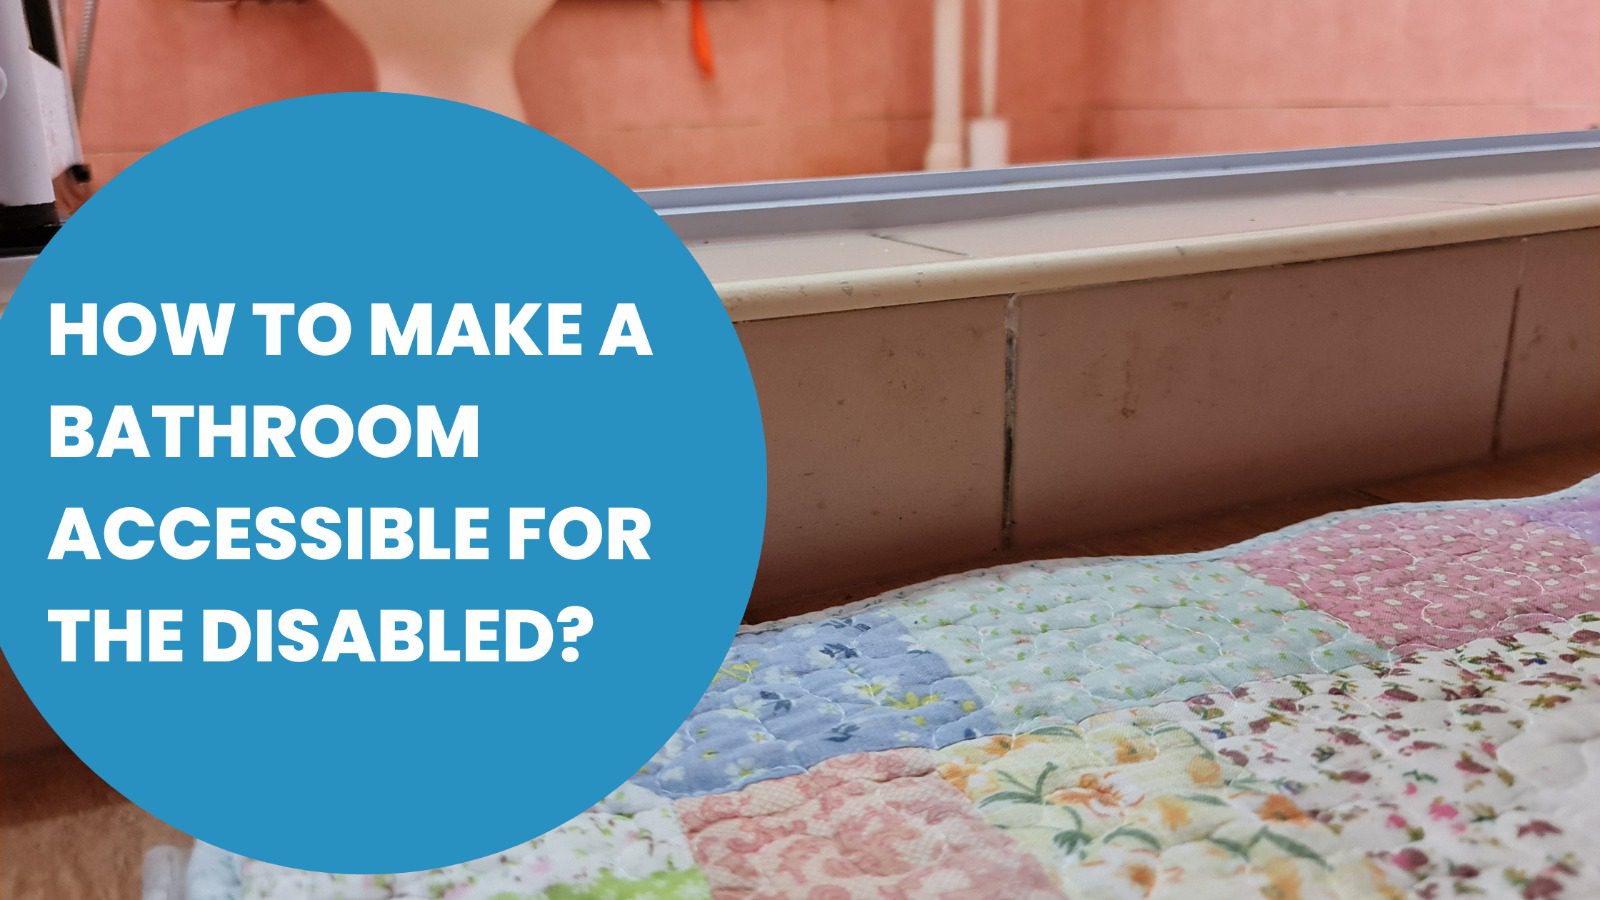 How to make a bathroom at home commode accessible for the disabled?